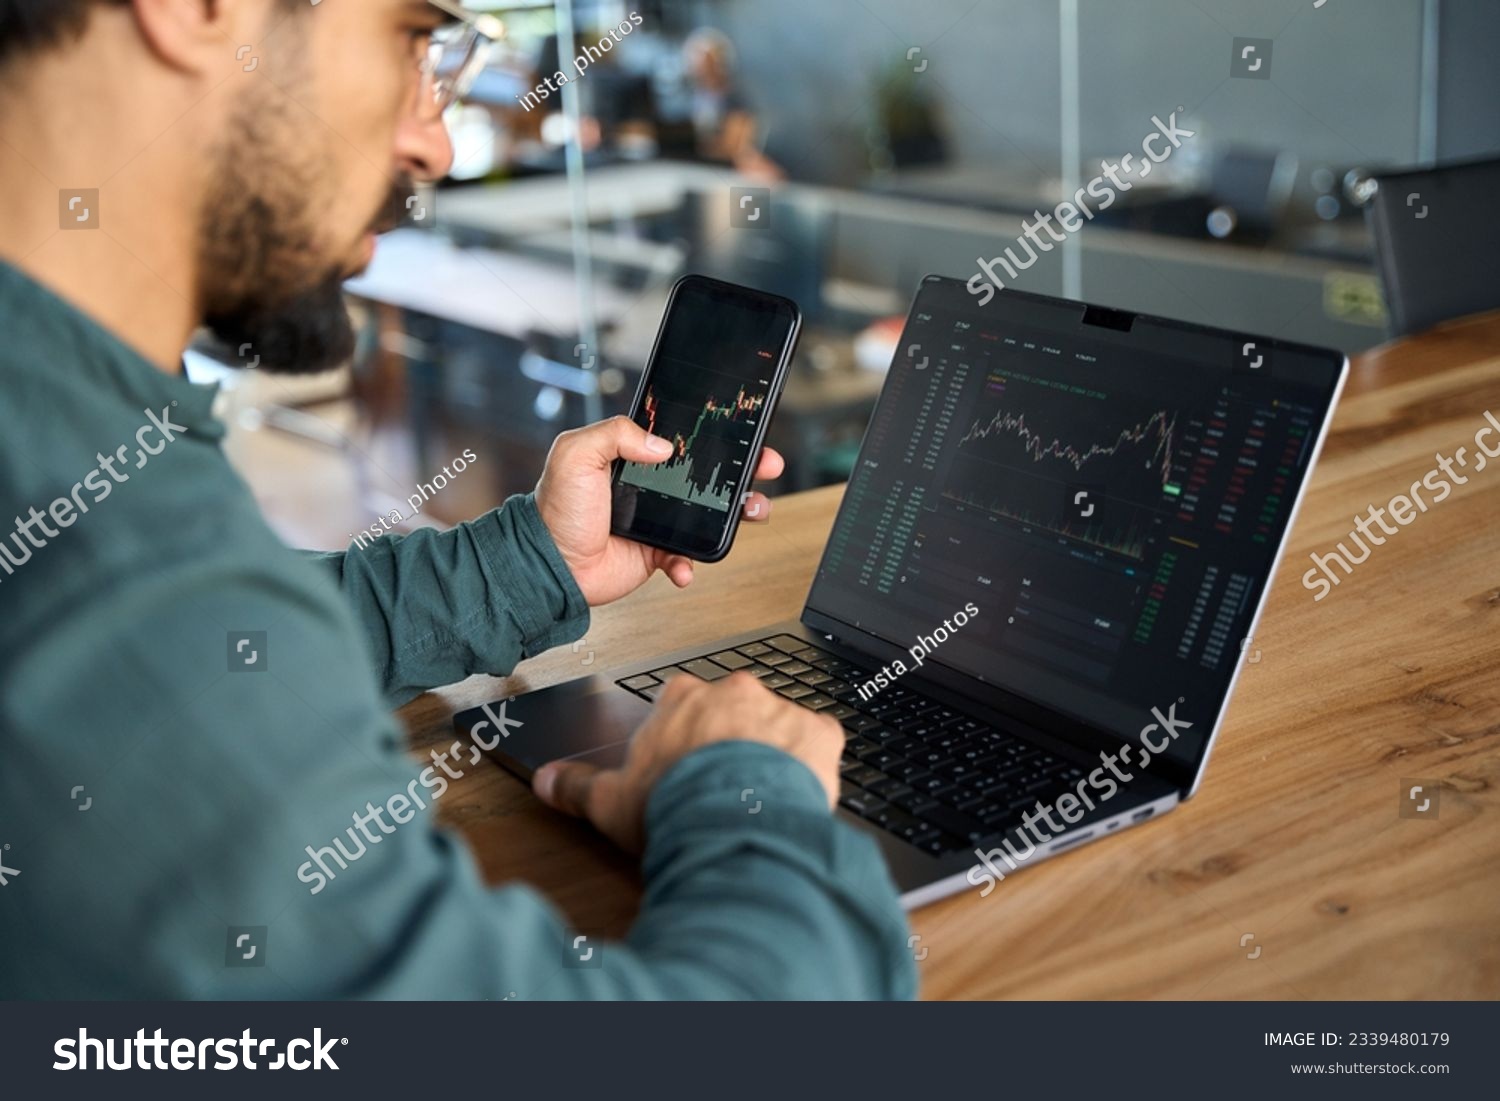 Investor using mobile phone and laptop checking trade market data. Stock trader broker looking at computer analyzing trading cryptocurrency finance market crypto stockmarket data, over shoulder view. #2339480179